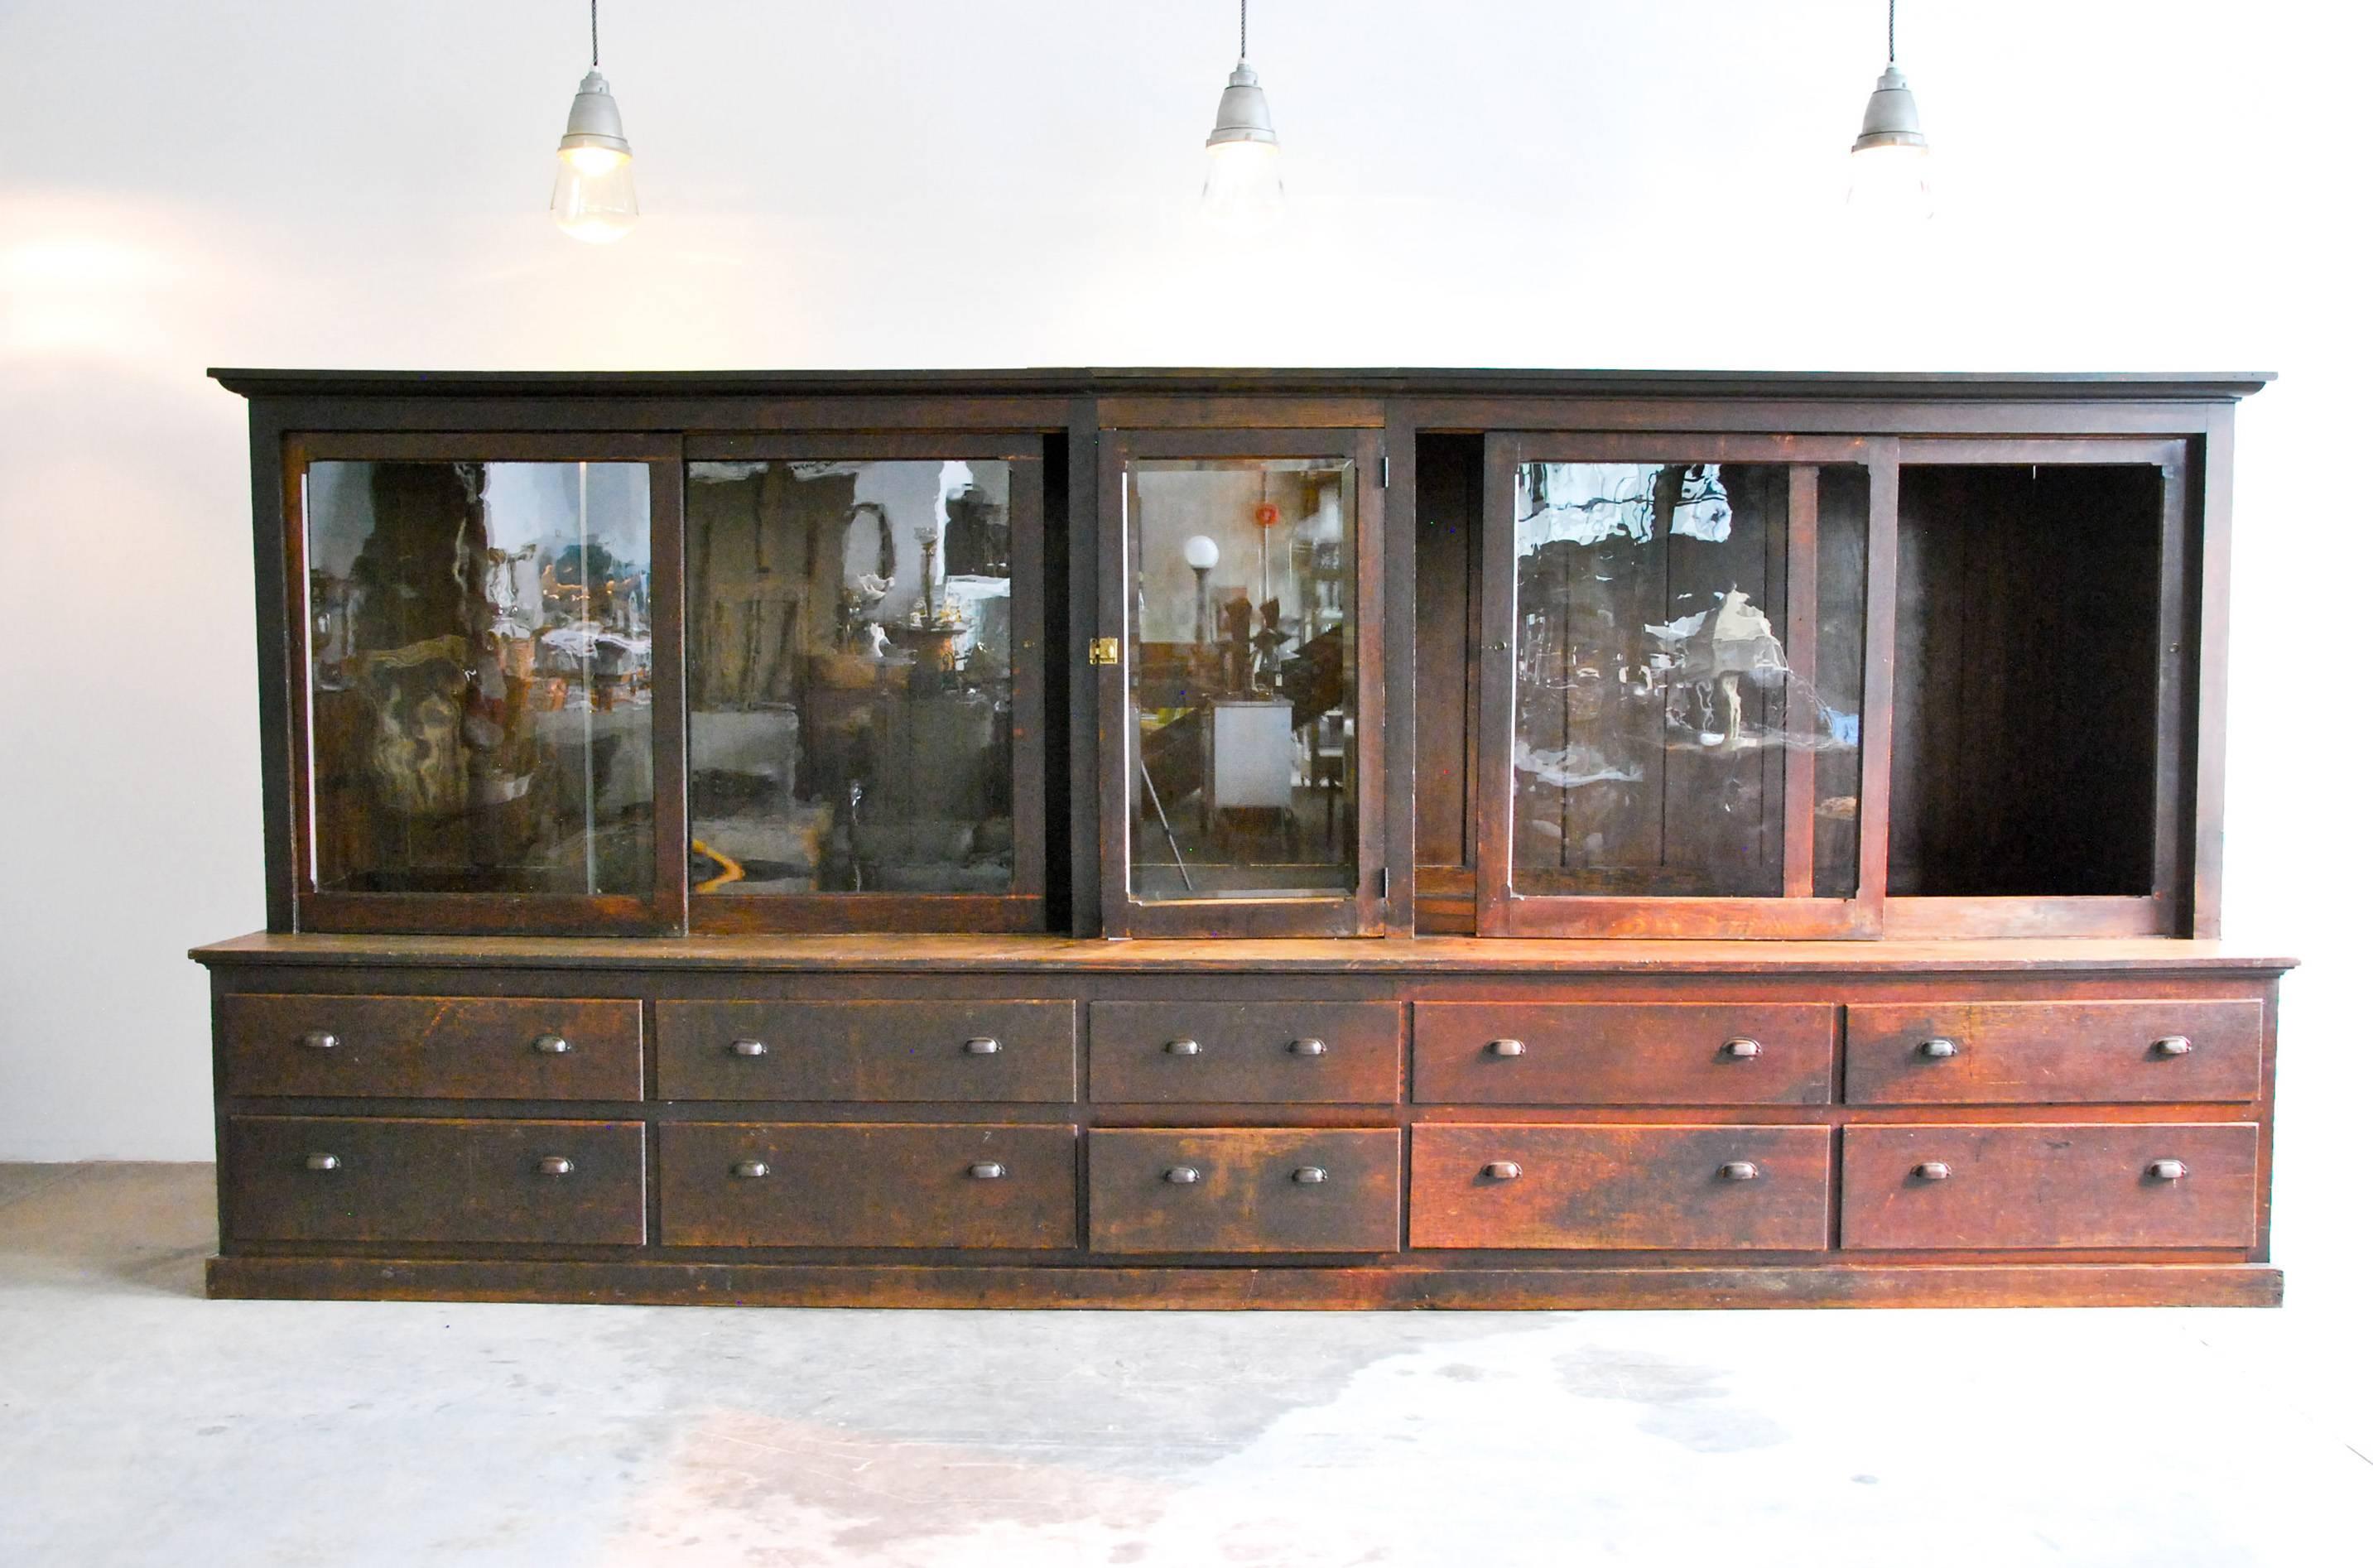 Exceptional display cabinet in original finish over oak, with sliding doors and ten working drawers for storage of goods.
This piece has the ability to have a centre featured display with adjustable shelves on two side pieces.
The cabinet is